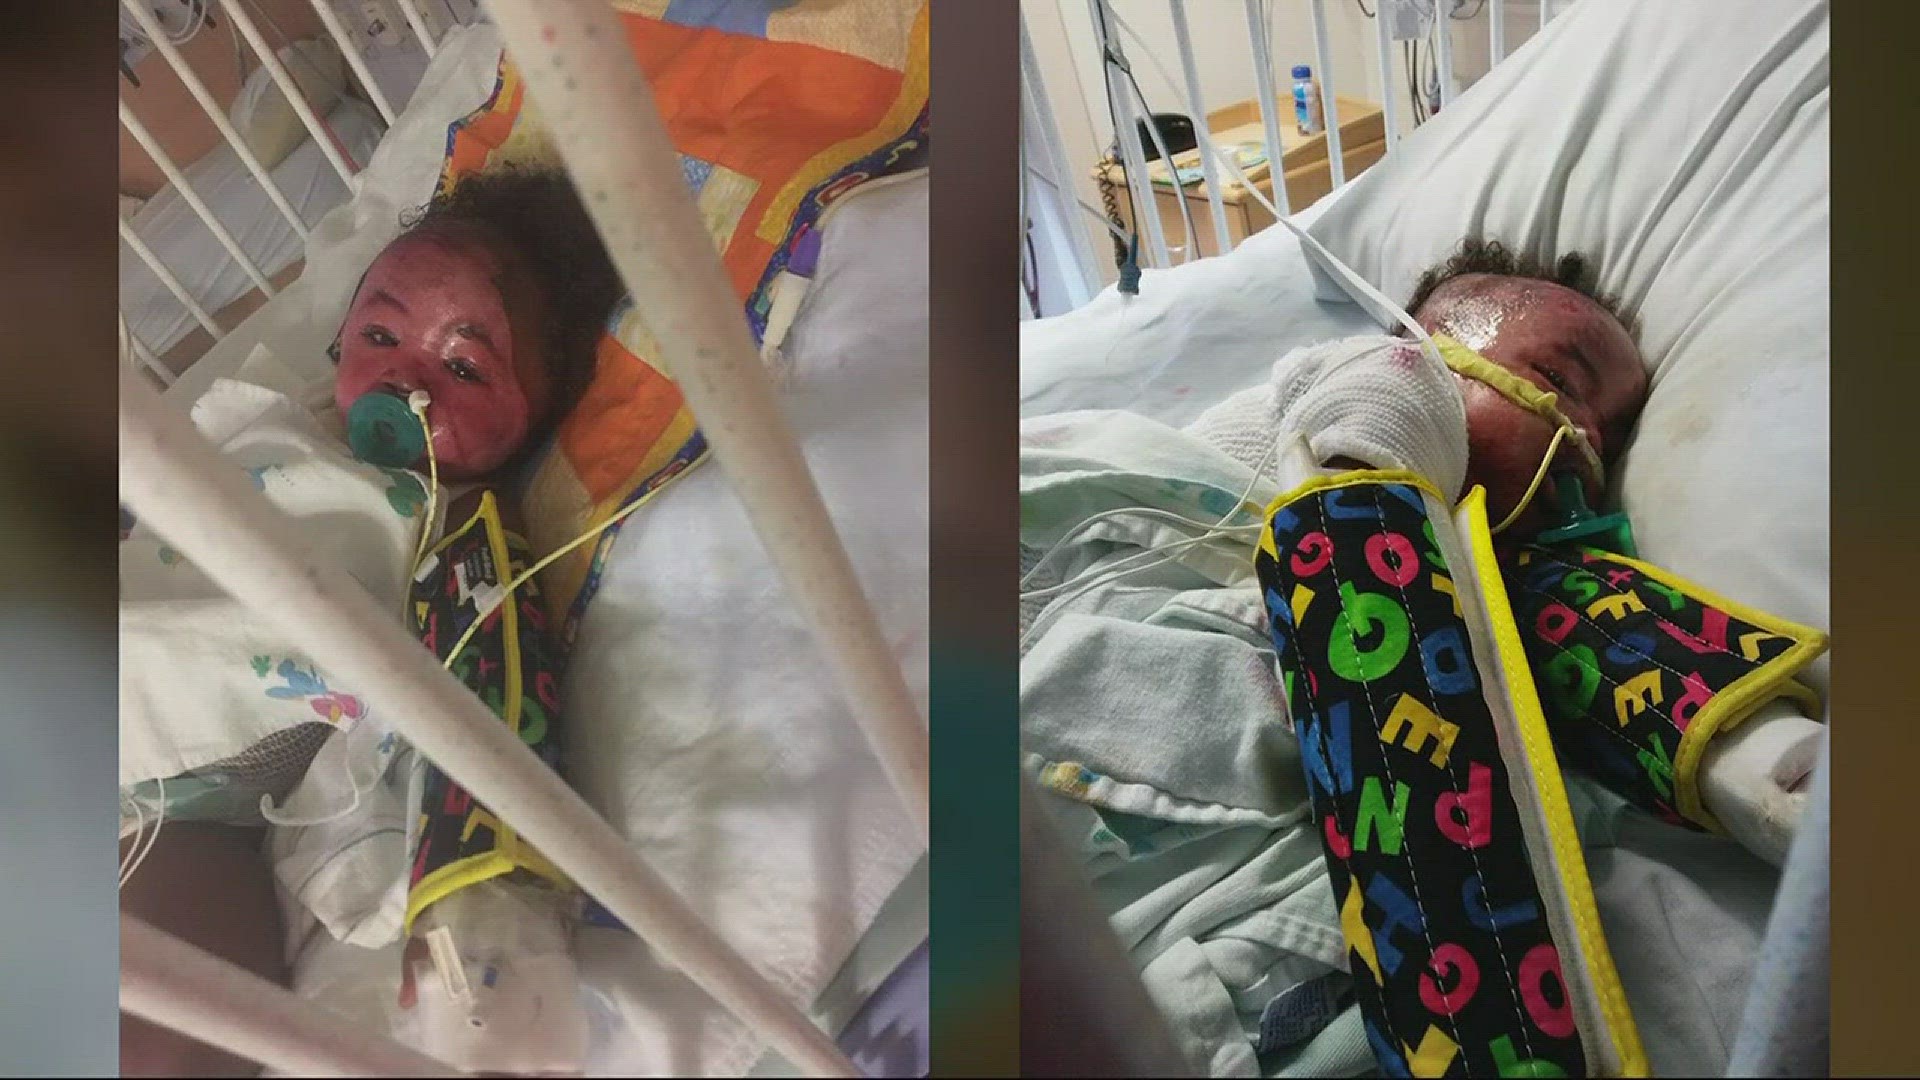 1-year-old baby King tried to grab a hot cup of water from the counter, thinking it was juice. The water spilled onto his body, severely burning his face, chest, and back.